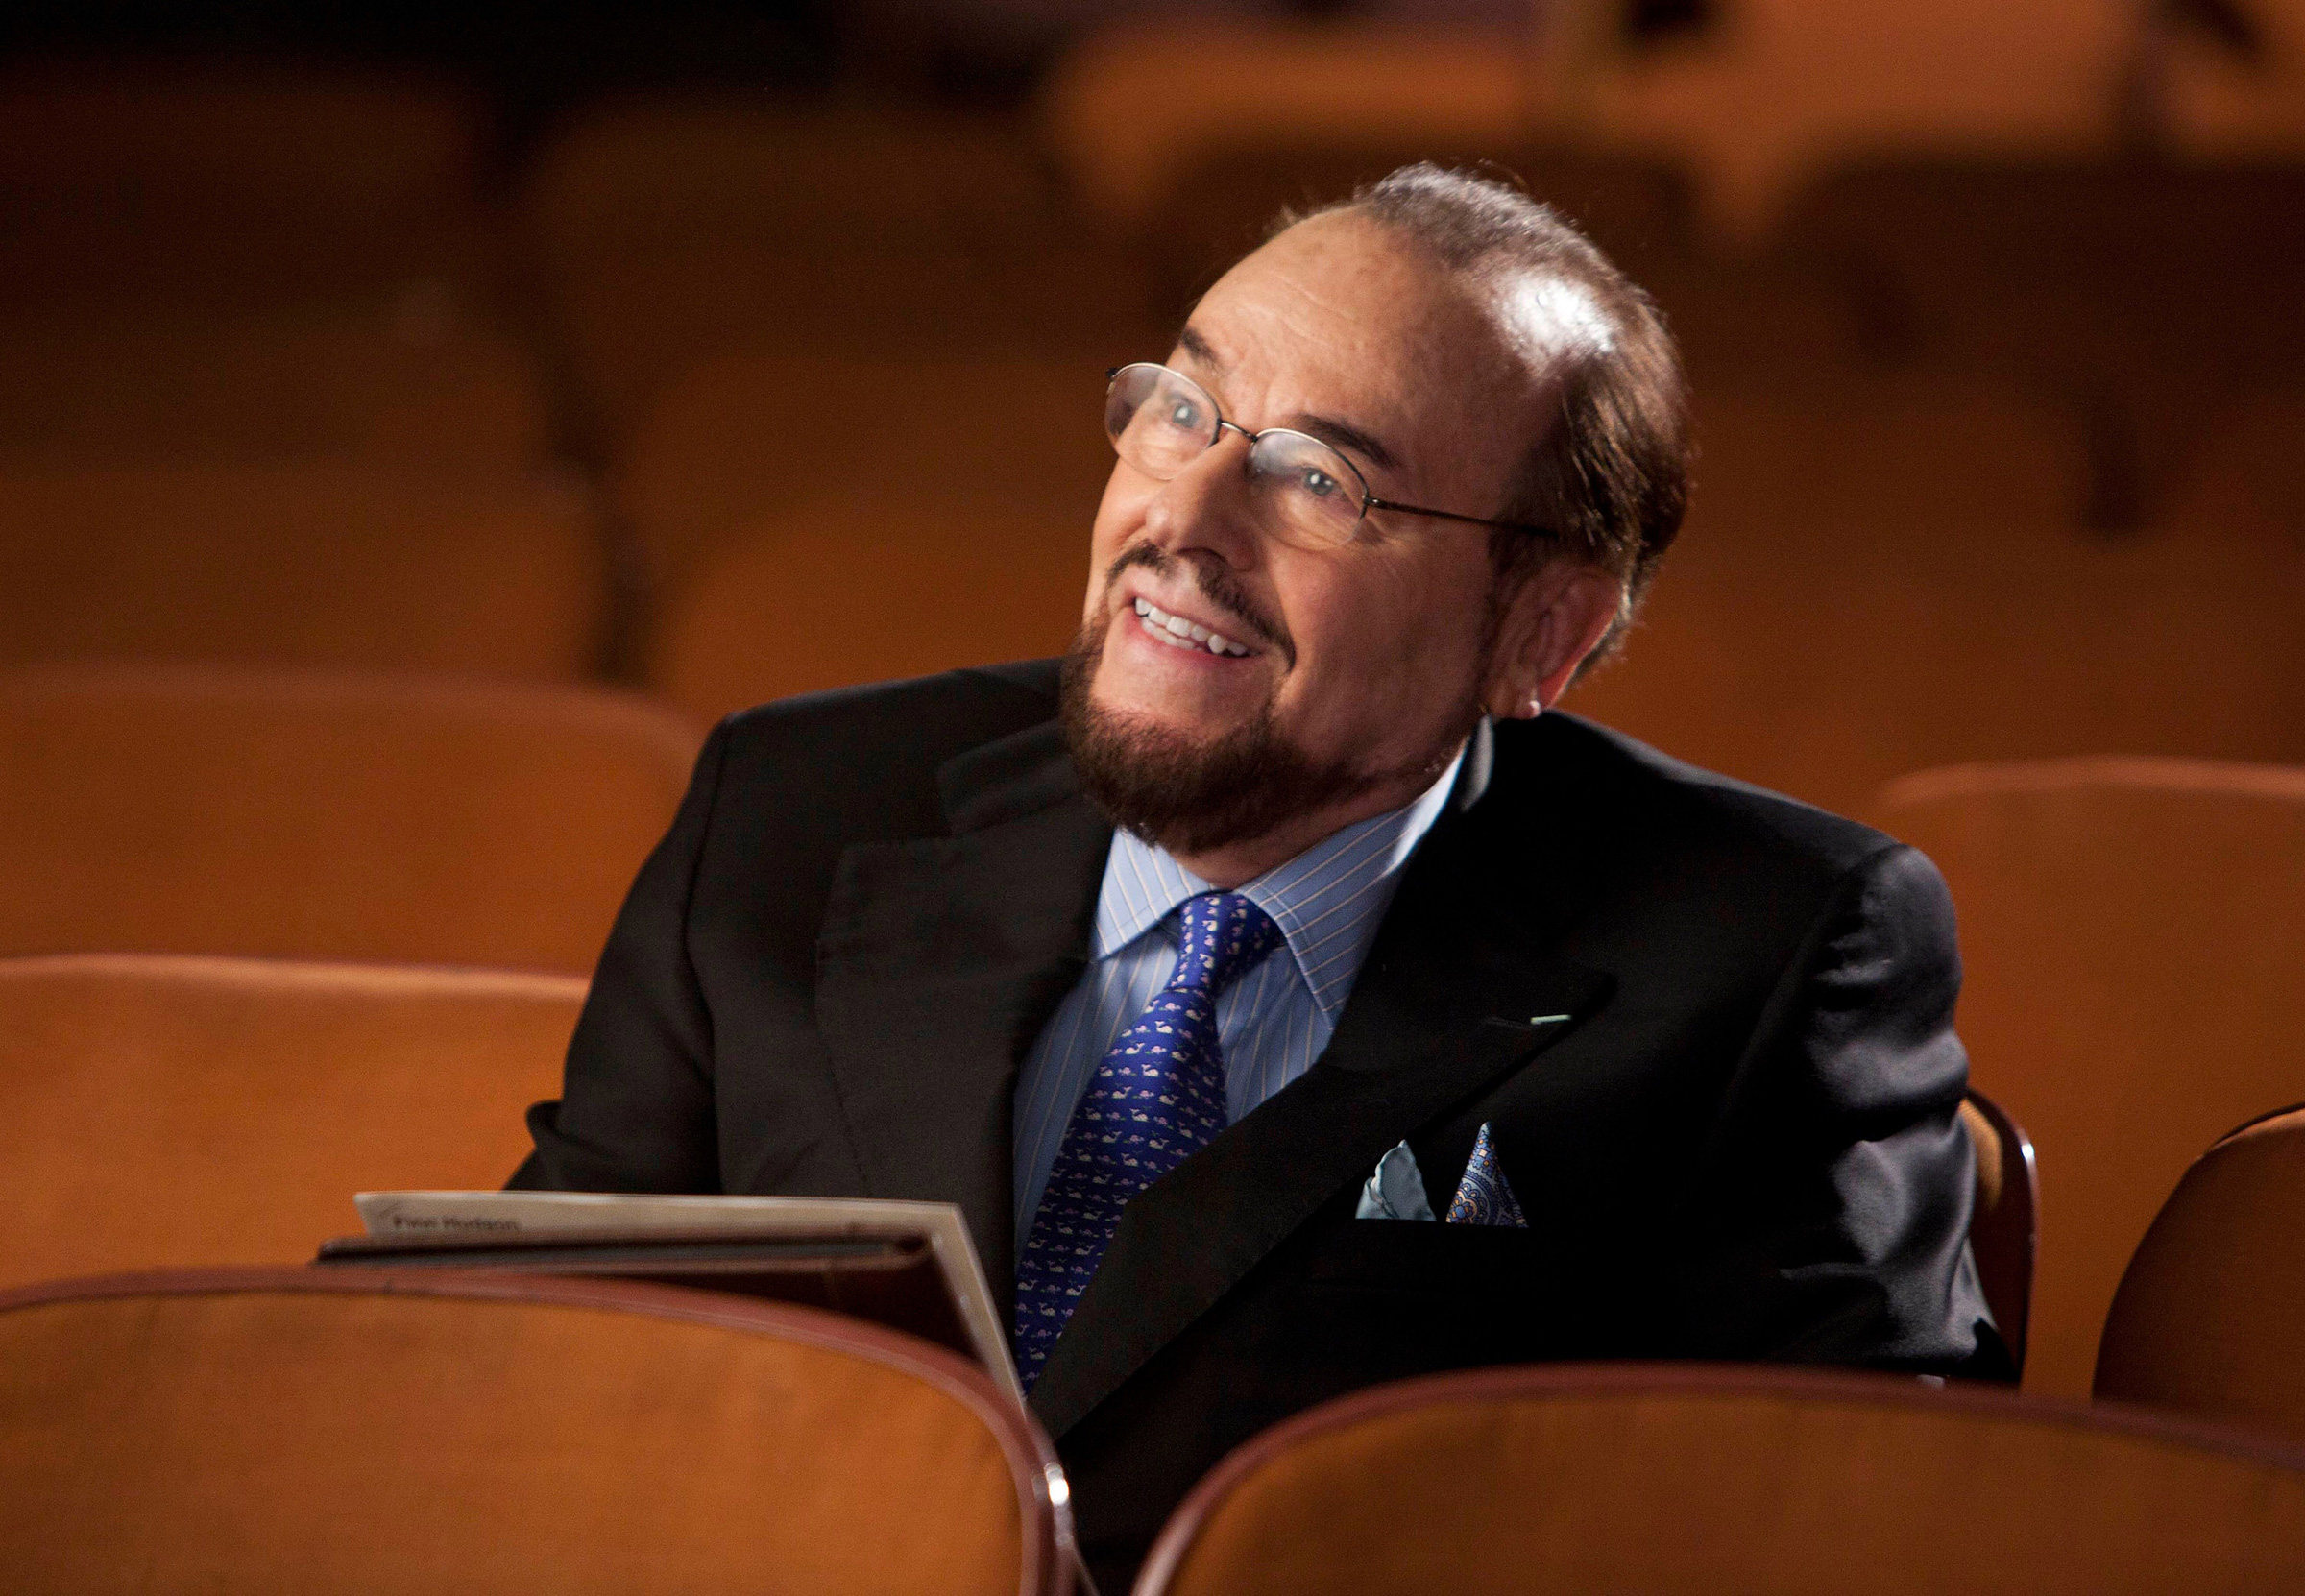 James Lipton guest-stars as himself in the "Goodbye" season finale episode of GLEE airing May 22, 2012 (FOX Image Collection/Getty Images)